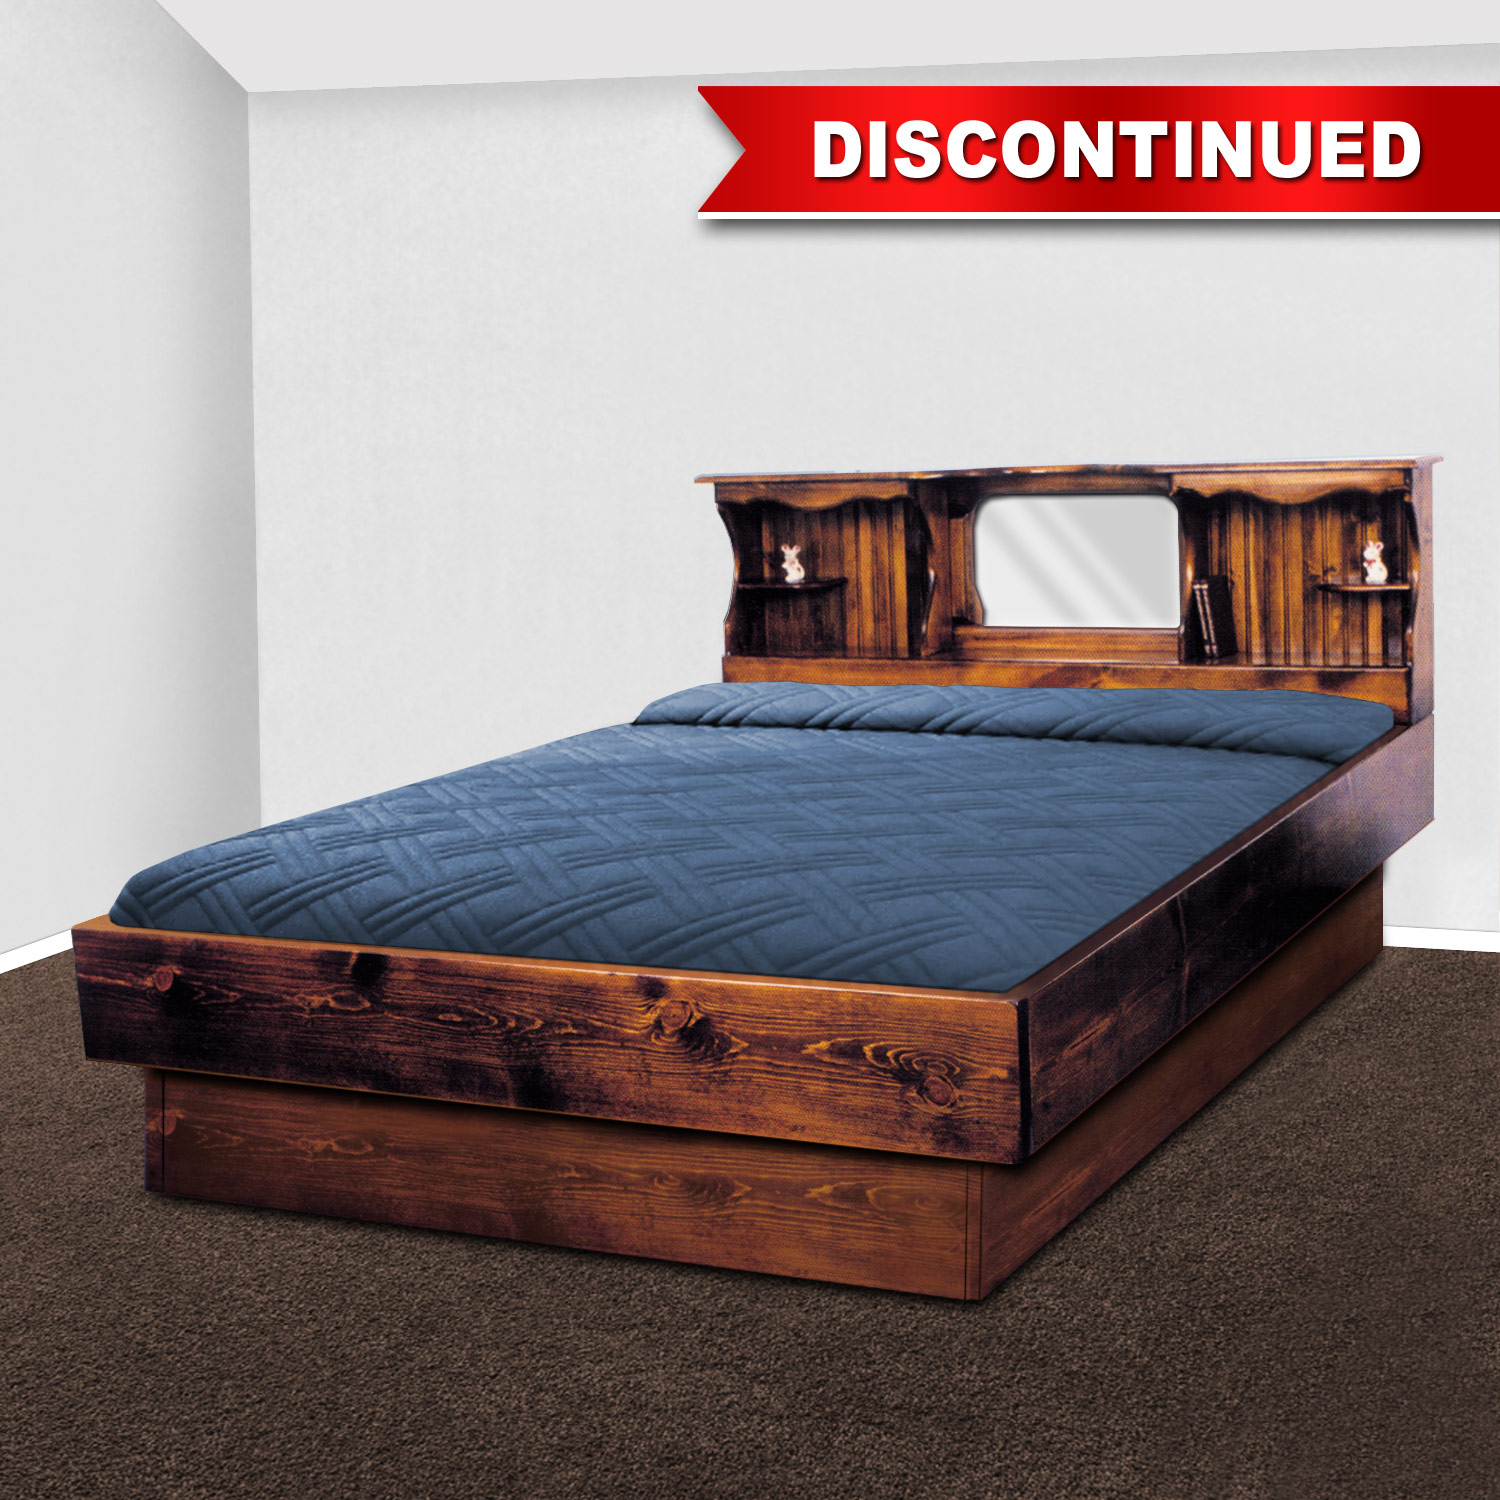 Waterbed Headboard Frame Set, Can You Put A Mattress In Waterbed Frame